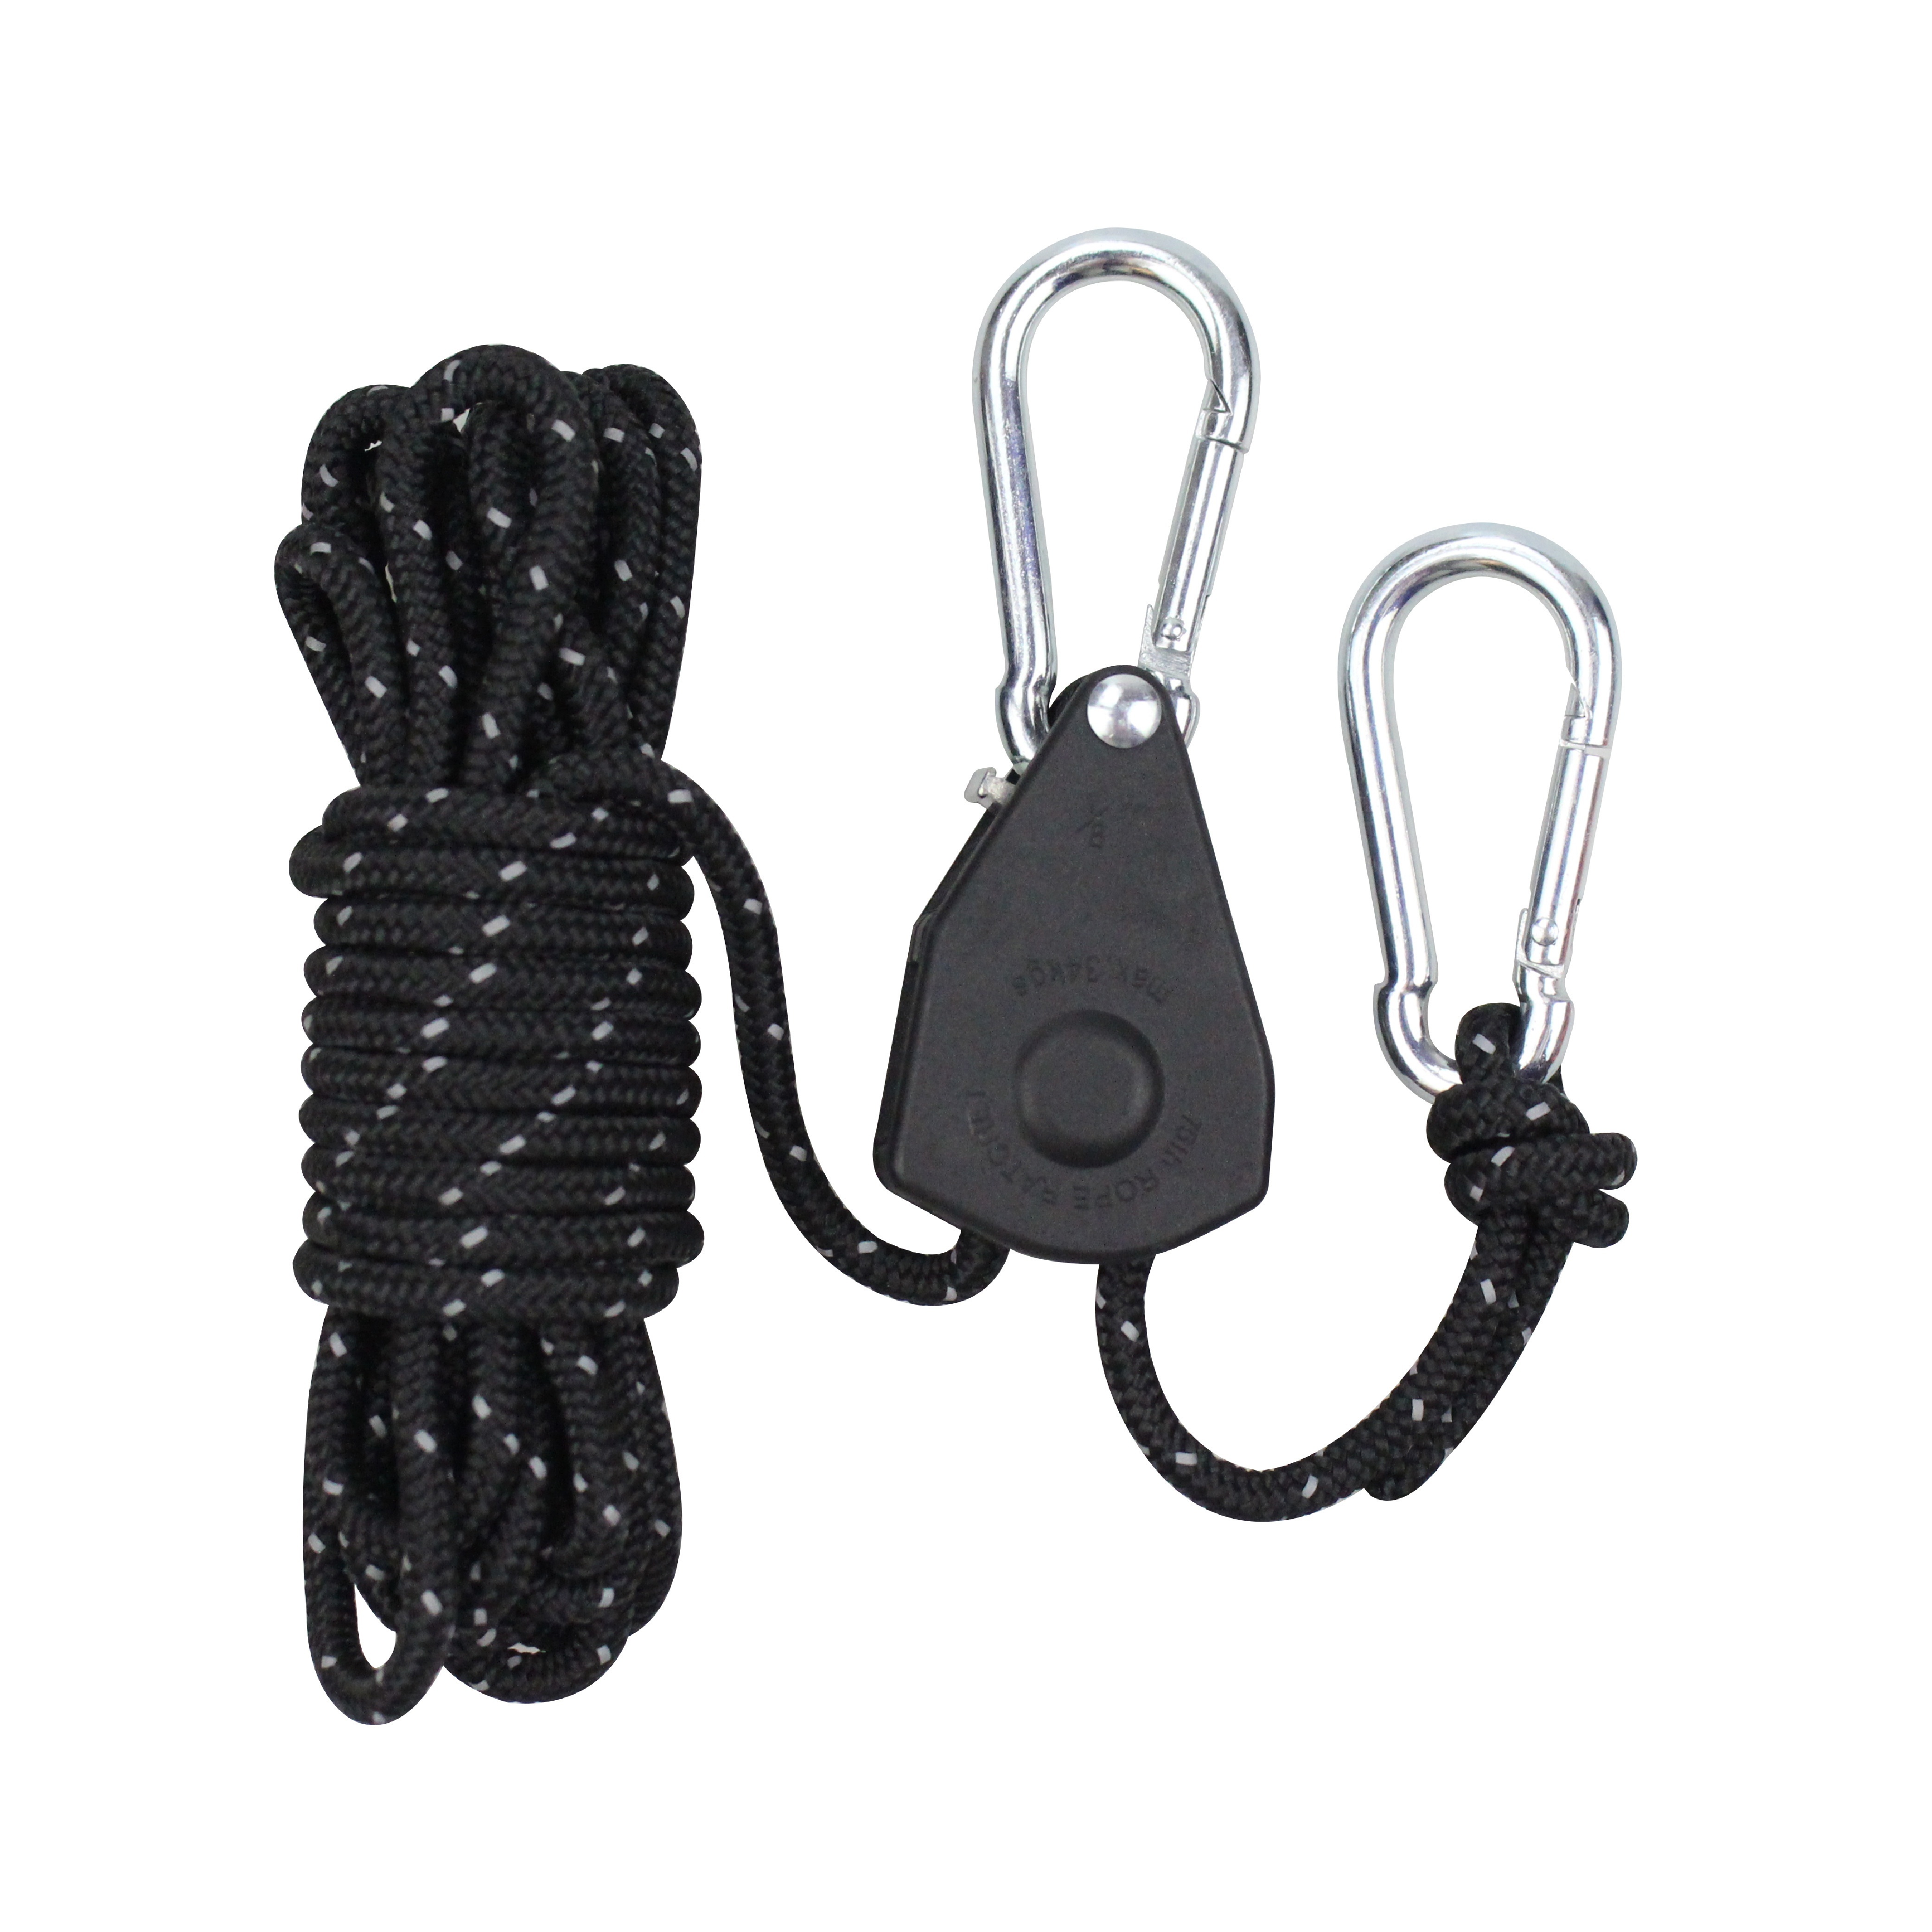 Tent Windproof Rope With Pulley Adjuster For Fixed Canopy